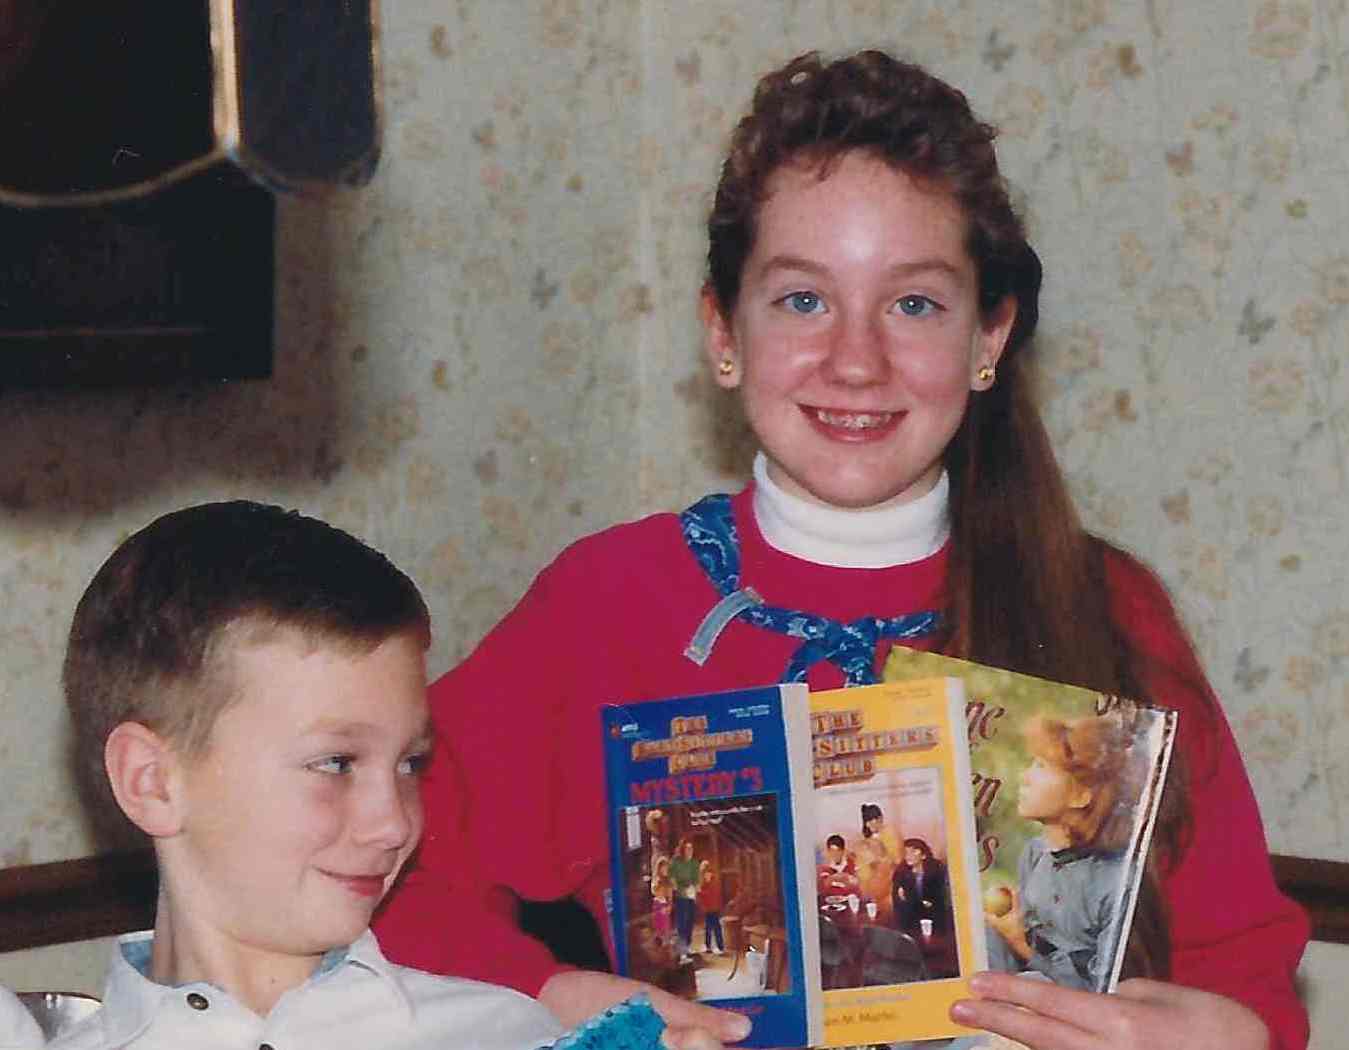 Doesn't my little brother look amused that I'm excited about the new books I got for my birthday?